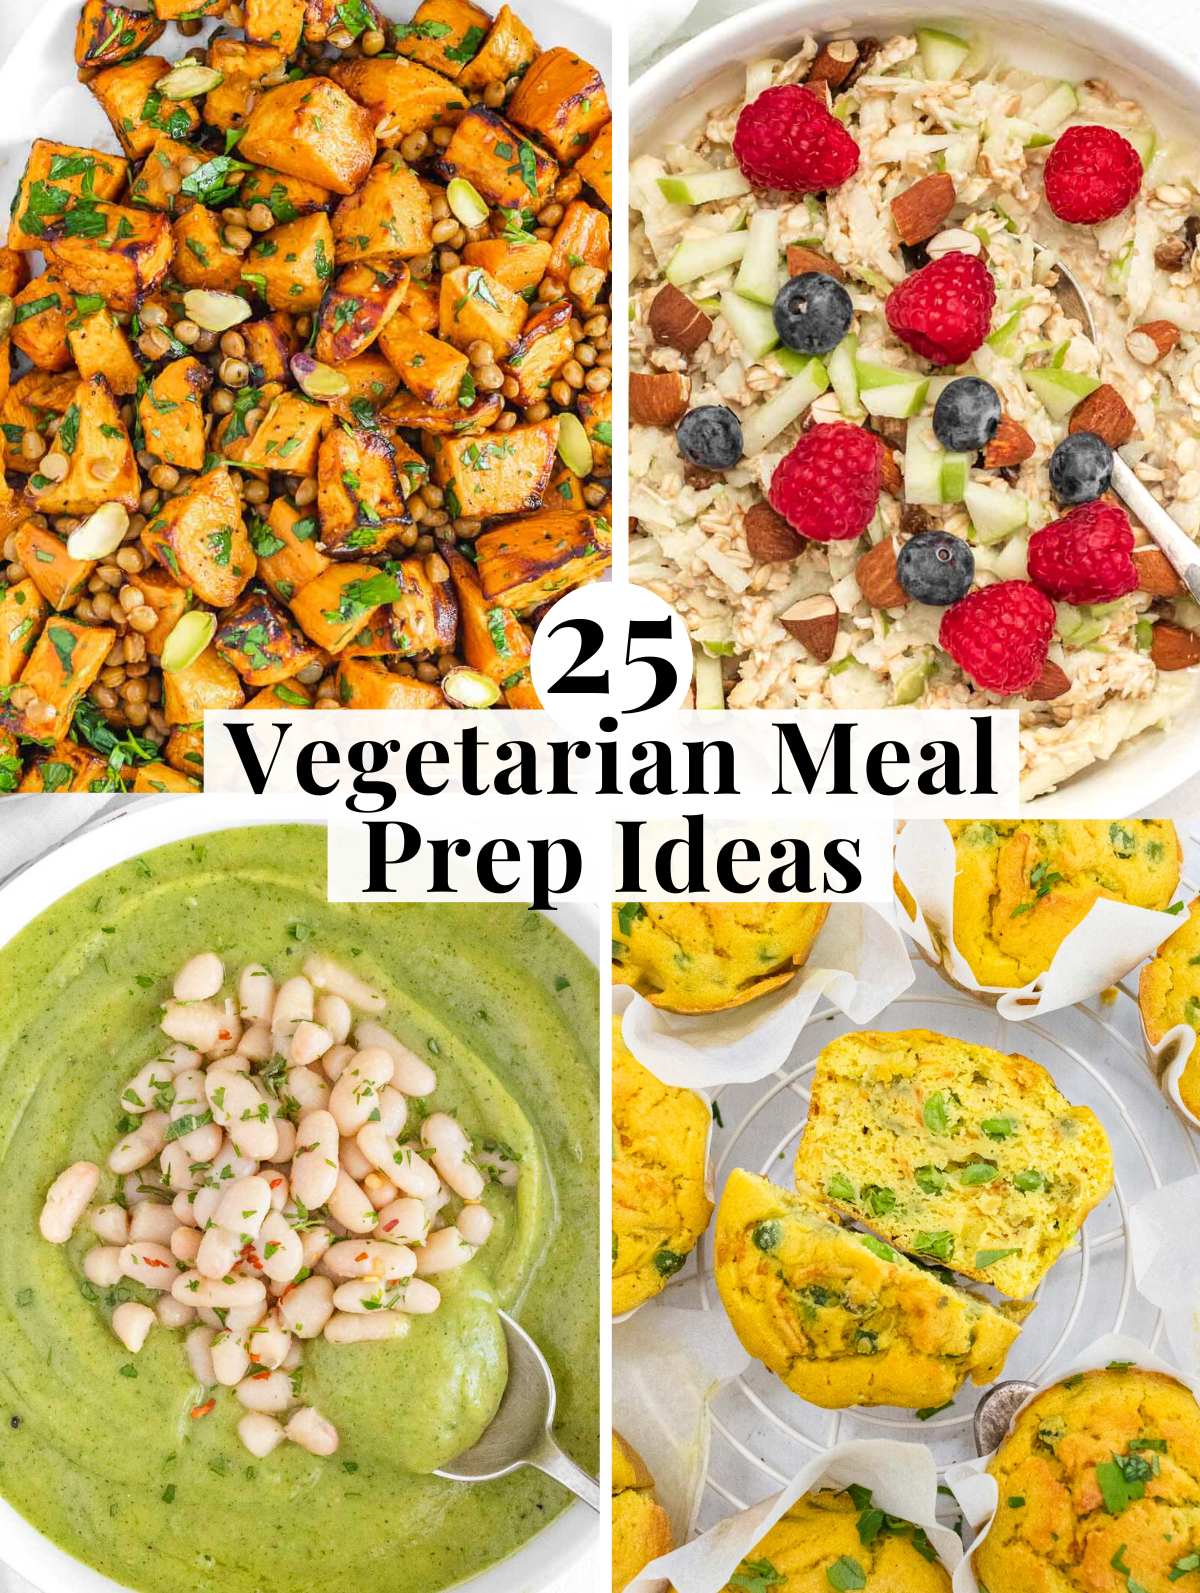 Vegetarian Meal Prep Ideas for breakfast, lunch and dinner